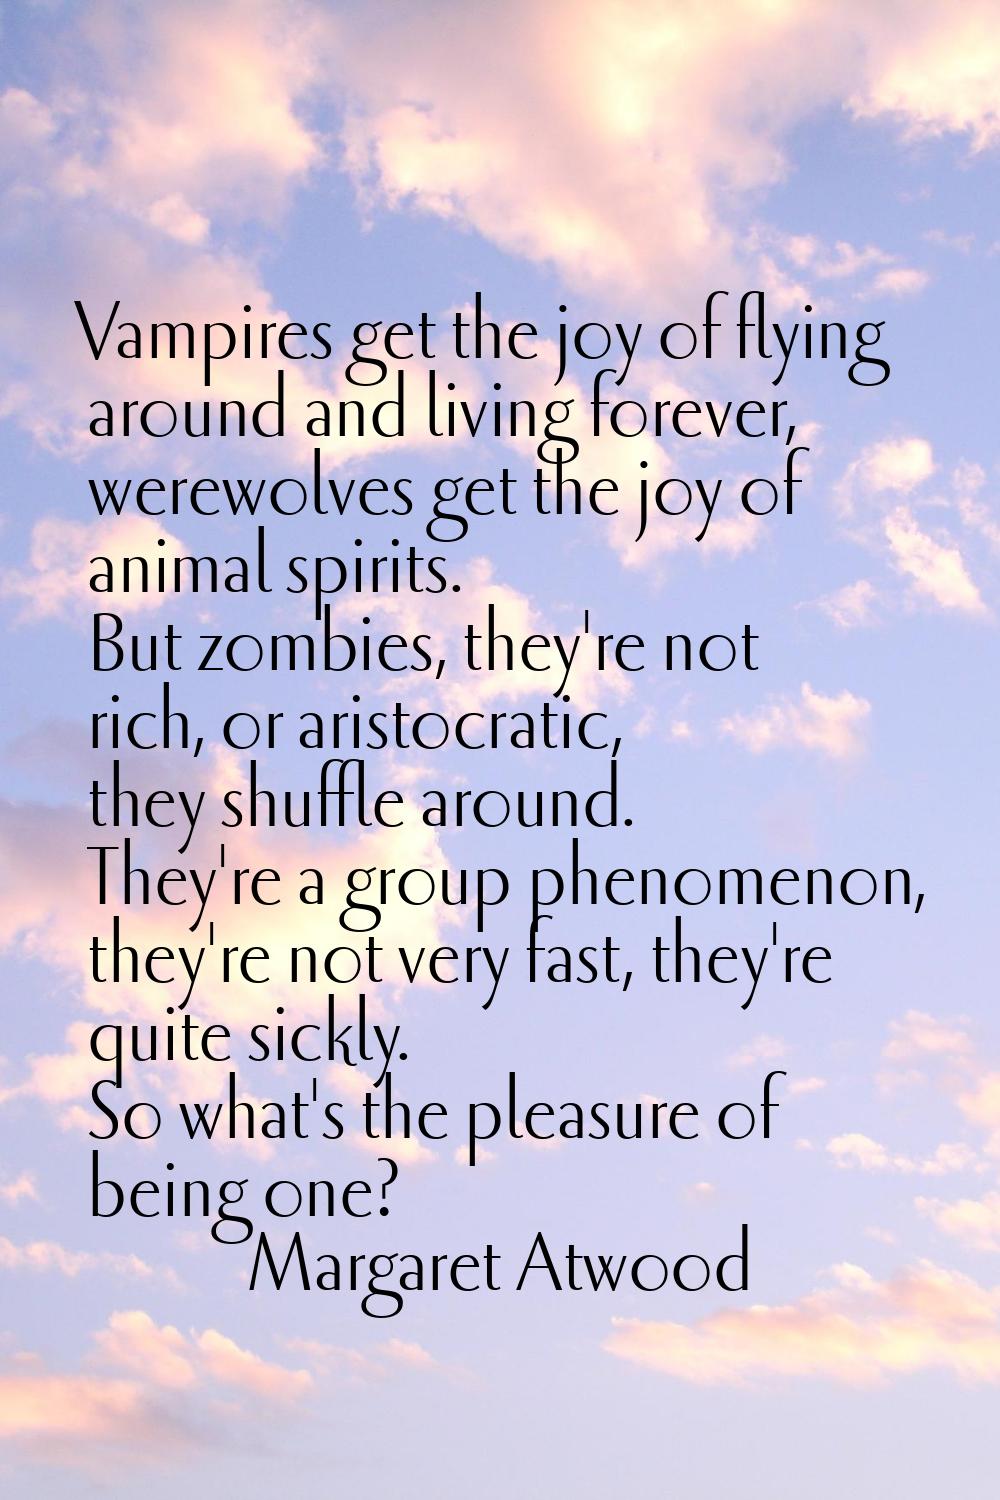 Vampires get the joy of flying around and living forever, werewolves get the joy of animal spirits.